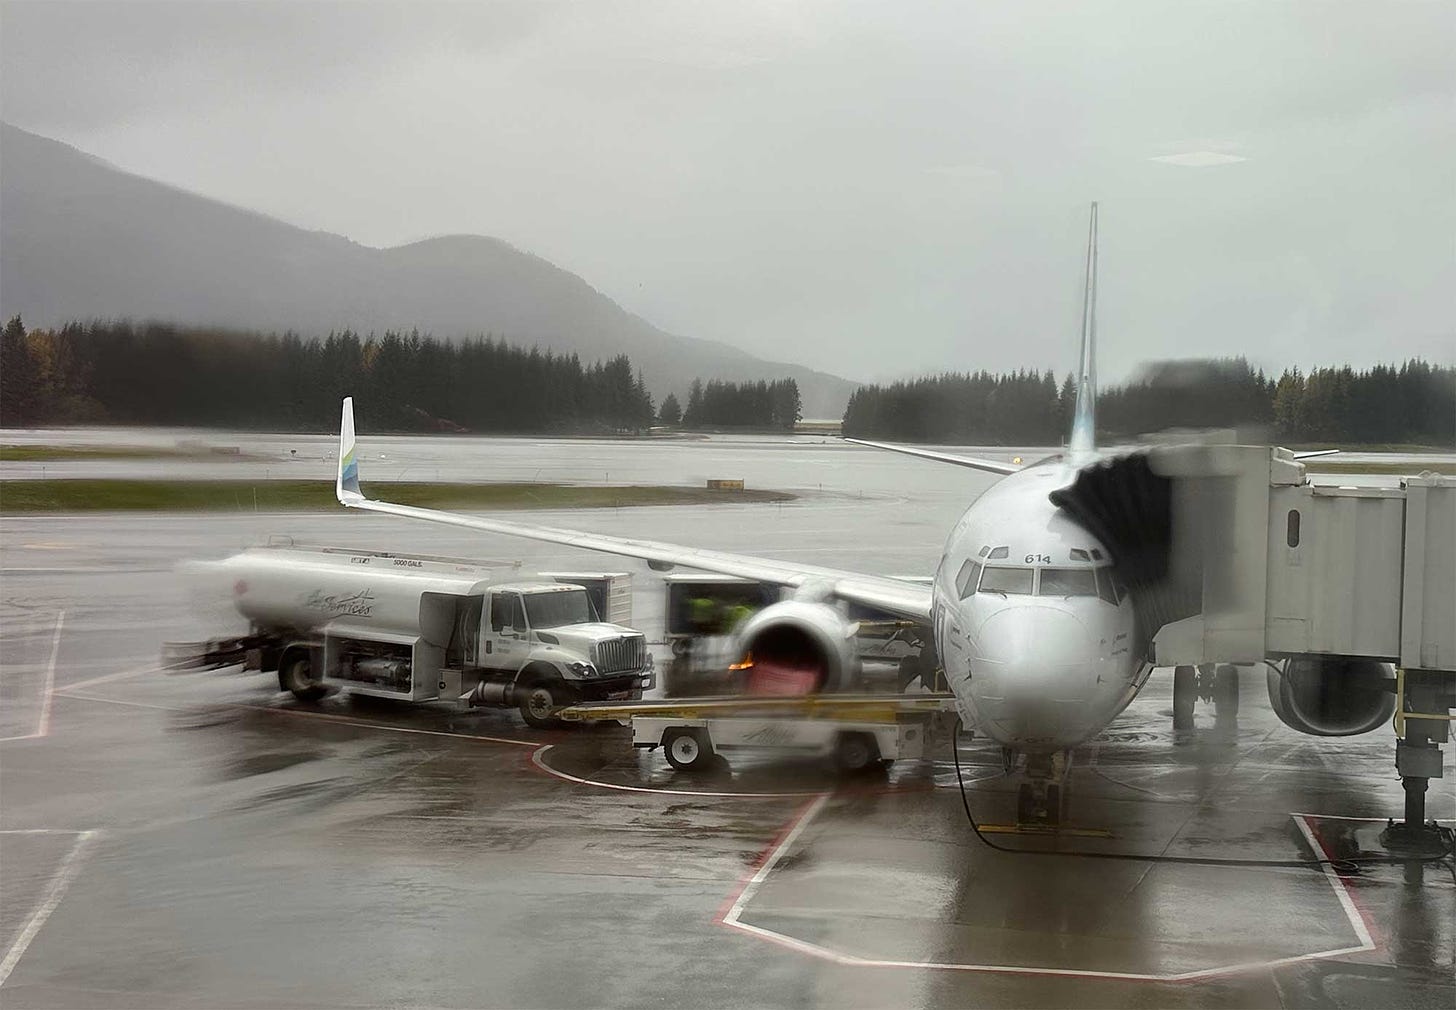 Alaska Airlines Boeing 737 parked at gate in Juneau, seen through rain-soaked and blurry window.